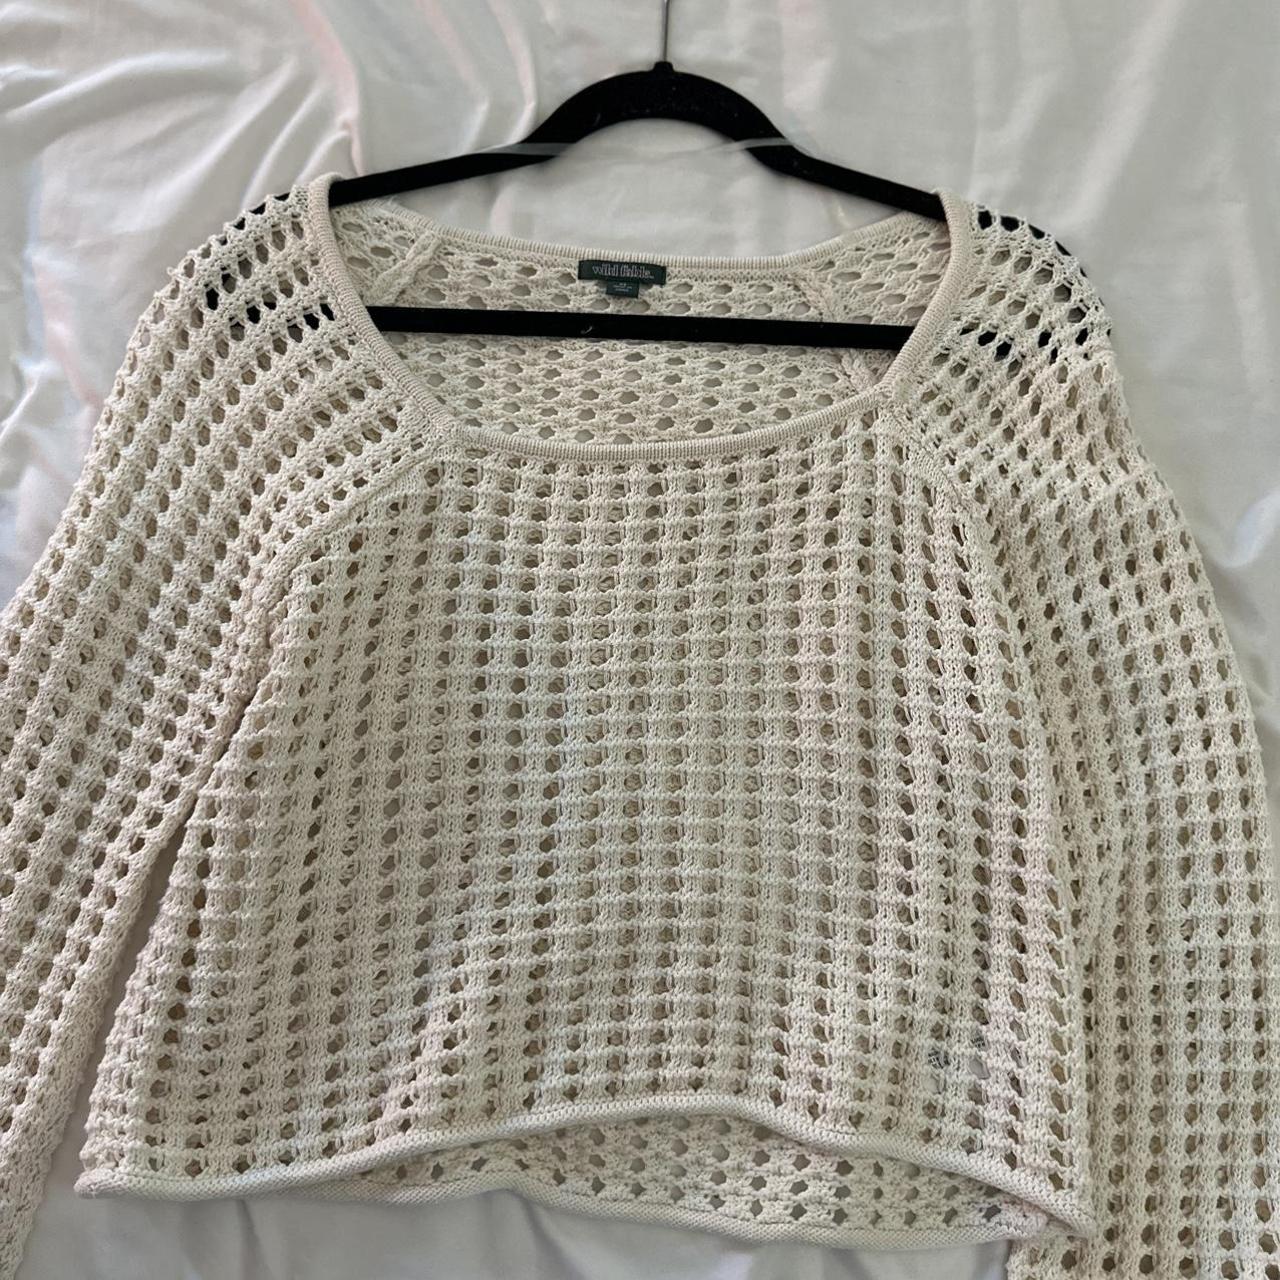 cream Wild fable sweater! in like new condition and